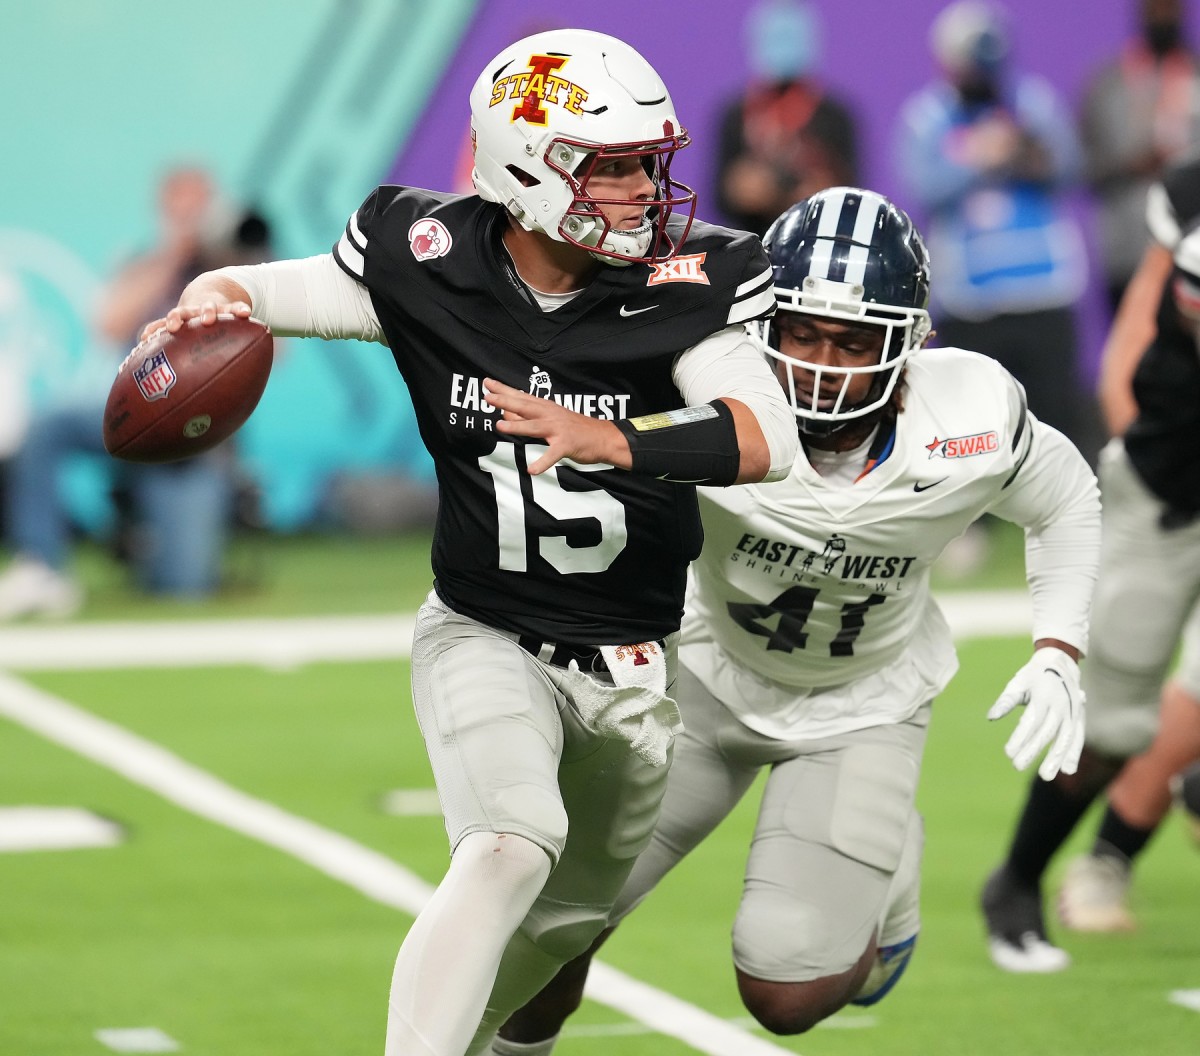 2022 NFL Draft: 10 HBCU prospects for Bears to target - Windy City Gridiron